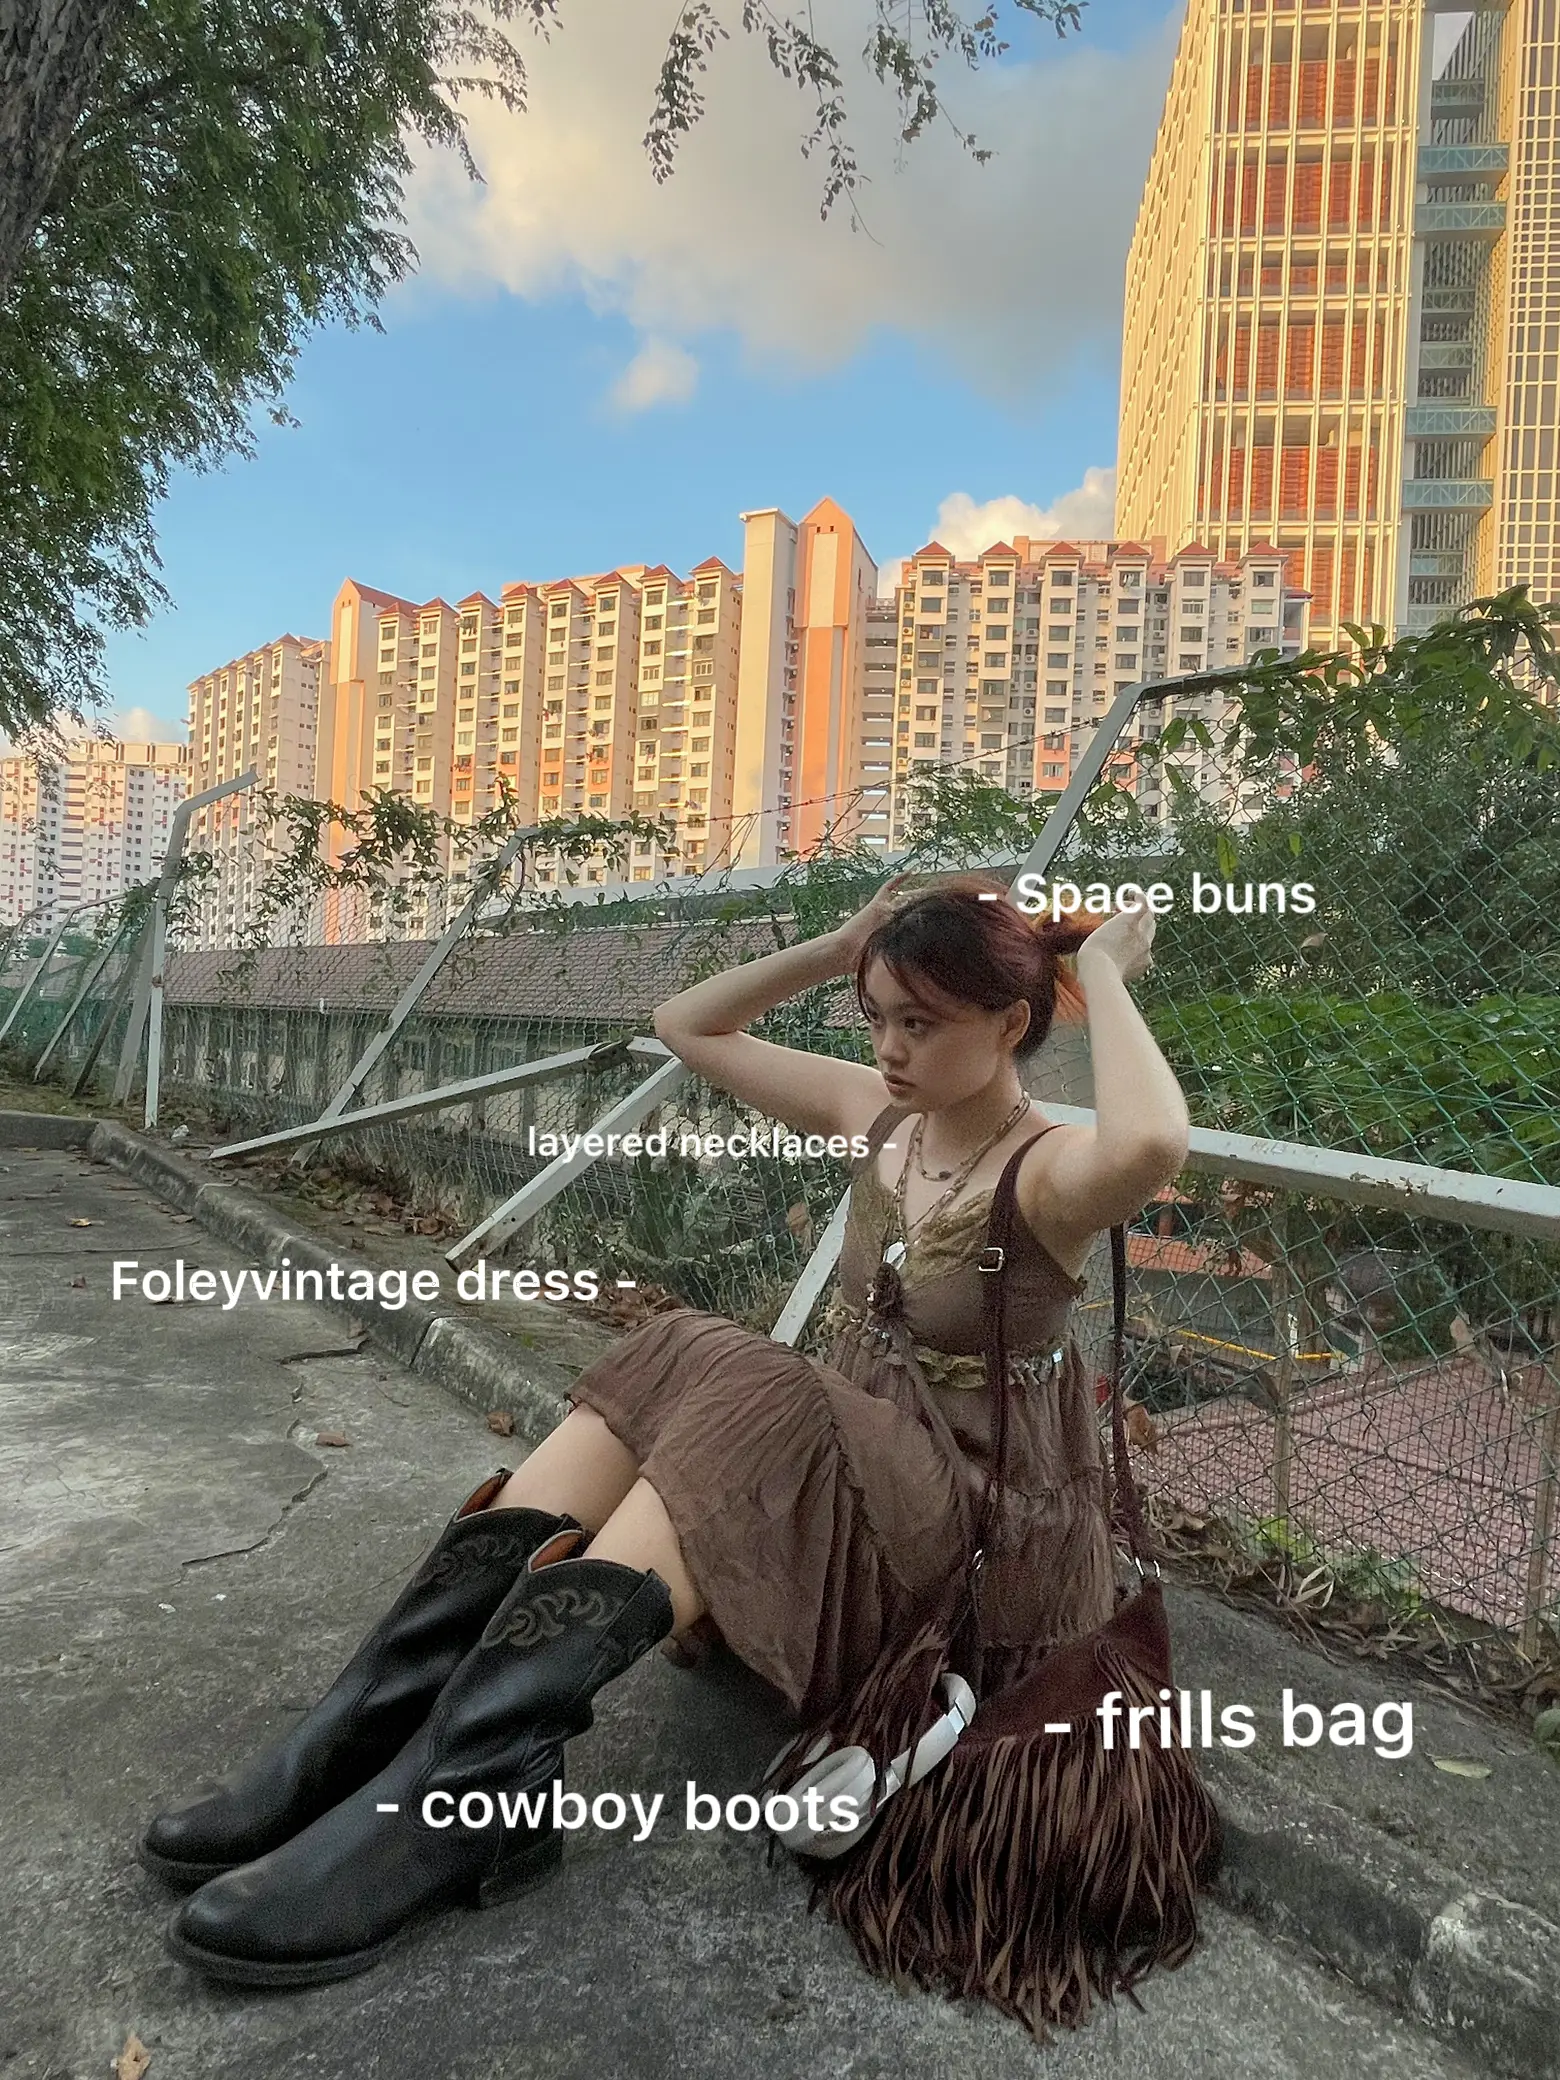 A Simple Guide To The Fairycore Aesthetic: Lifestyle, Outfits